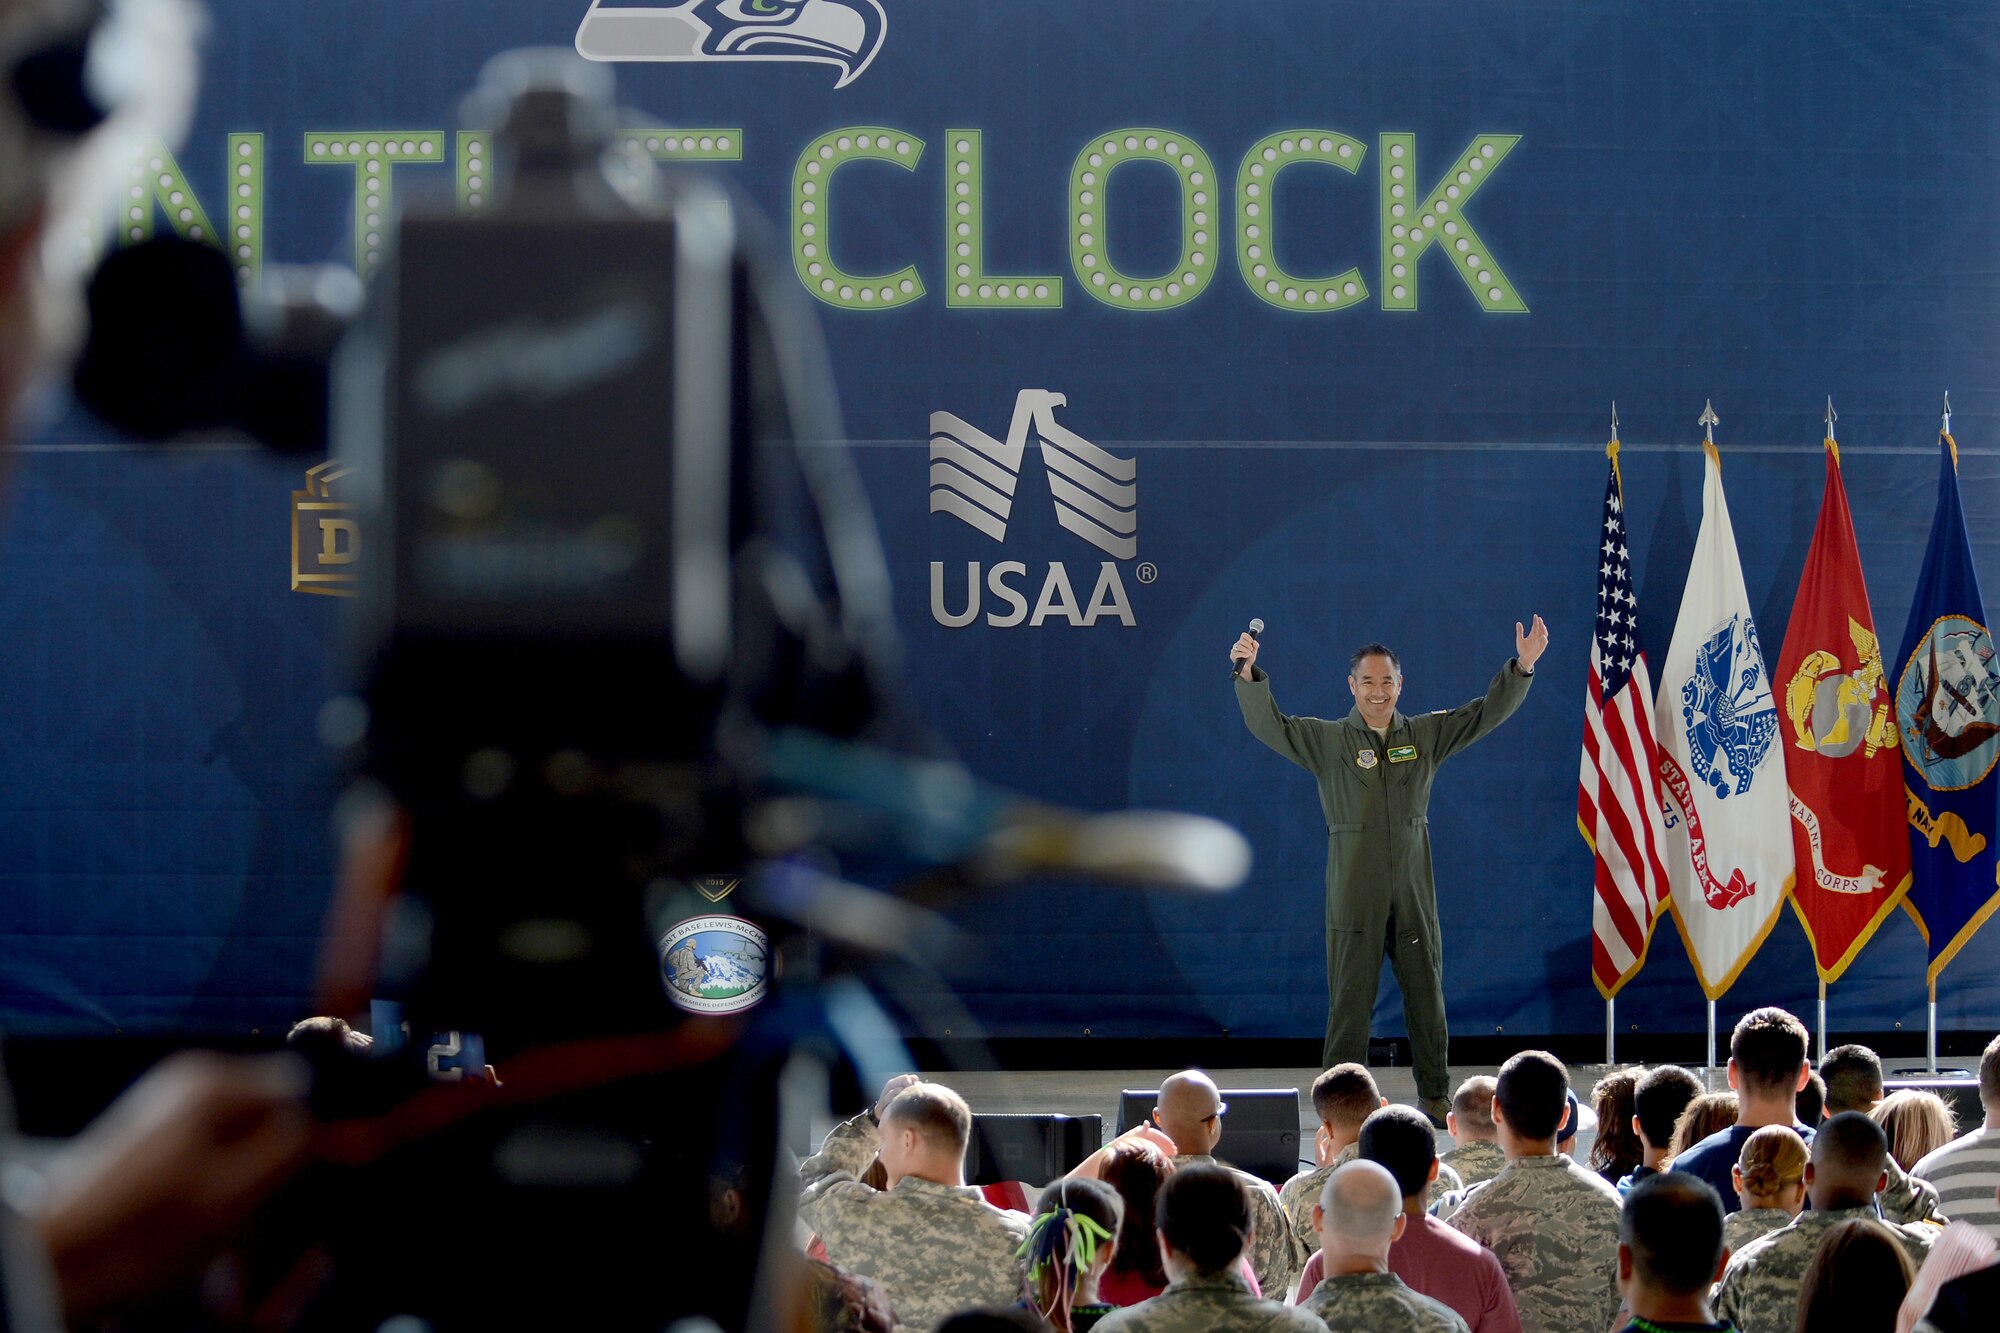 Col. David Kumashiro, 62nd Airlift Wing commander, talks to a crowd May 2, 2015, during the Seattle Seahawks draft day event at Joint Base Lewis-McChord, Wash. Throughout the day, the Seahawks made six picks which then were shown on the NFL Network channel or through social media platforms. (U.S. Air Force photo/Airman 1st Class Keoni Chavarria)